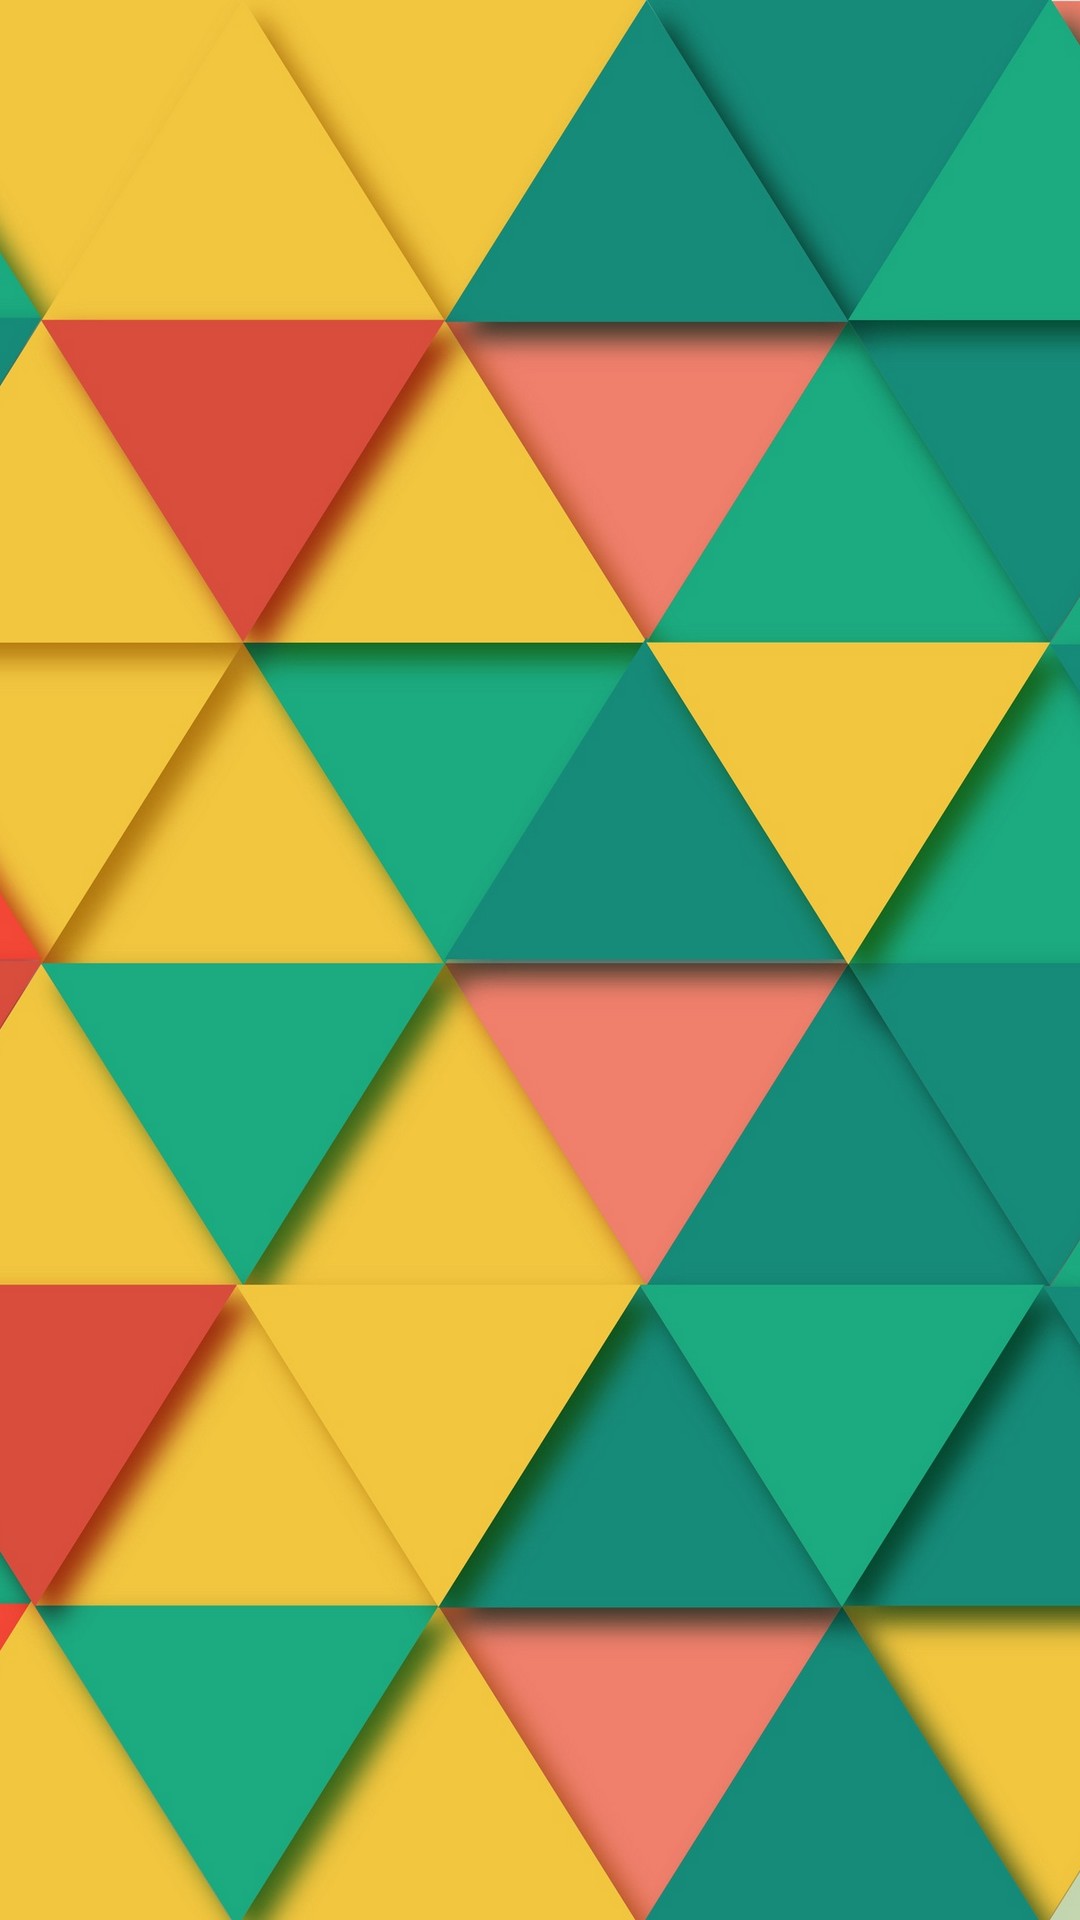 Wallpaper Android Geometric With high-resolution 1080X1920 pixel. You can use this wallpaper for your Android backgrounds, Tablet, Samsung Screensavers, Mobile Phone Lock Screen and another Smartphones device